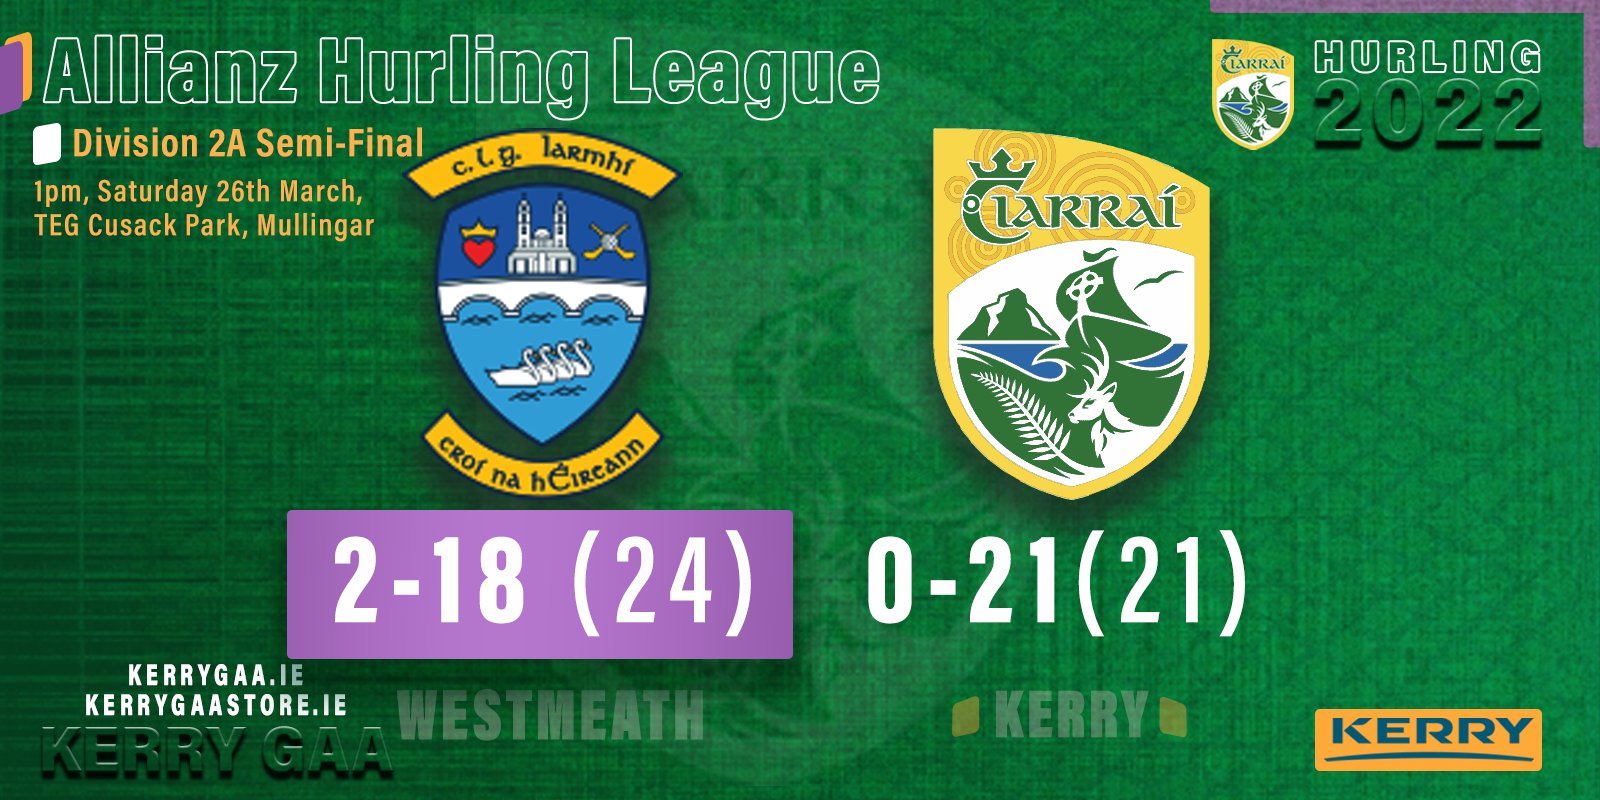 No luck for Kerry Hurlers as Westmeath advance to Final